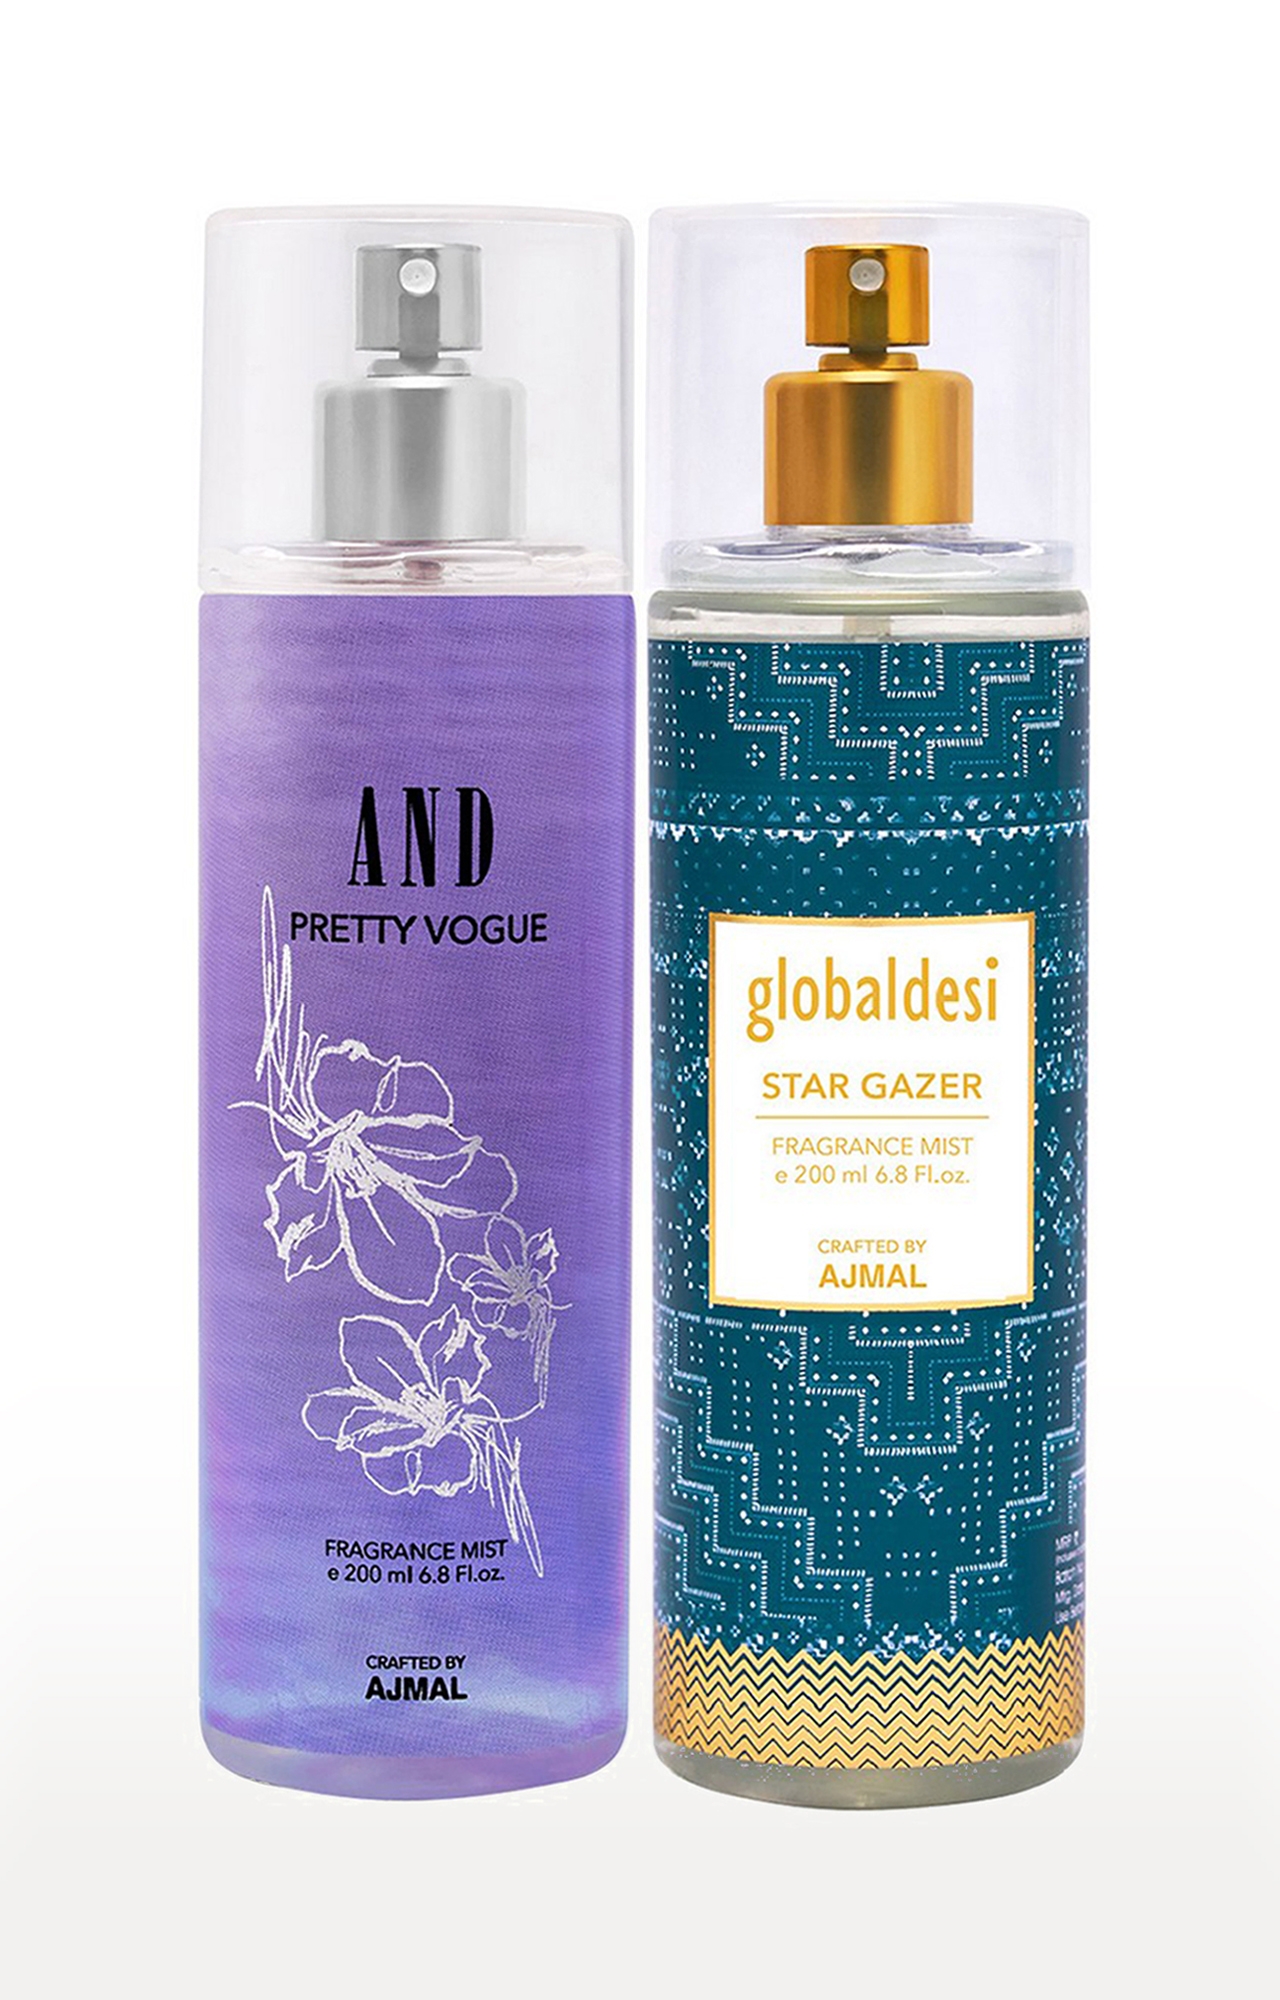 AND Crafted By Ajmal | AND Pretty Vogue Body Mist 200ML & Global Desi Star Gazer Body Mist 200ML Long Lasting Scent Spray Gift For Women Perfume FREE